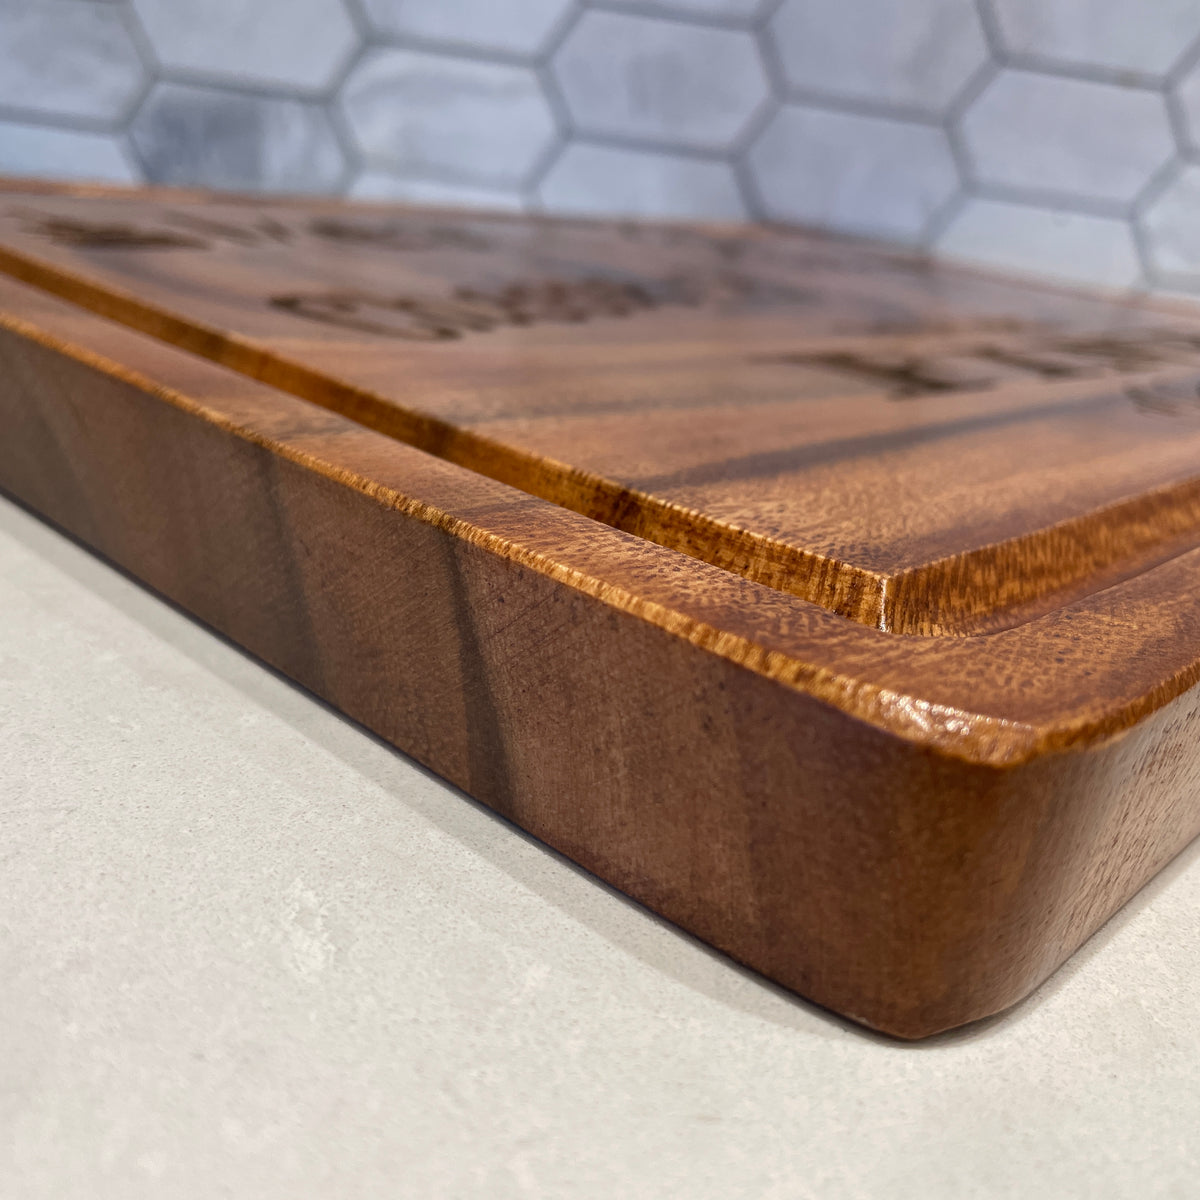 Acacia Wood Cutting Board and Serving Boards, Charcuterie Board